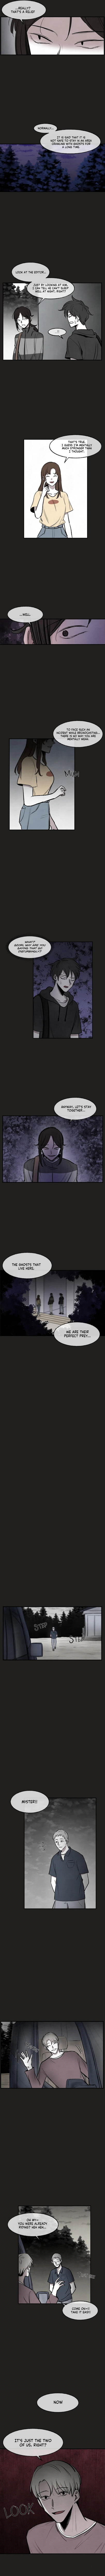 Devil’s Editing Chapter 25 - Page 4